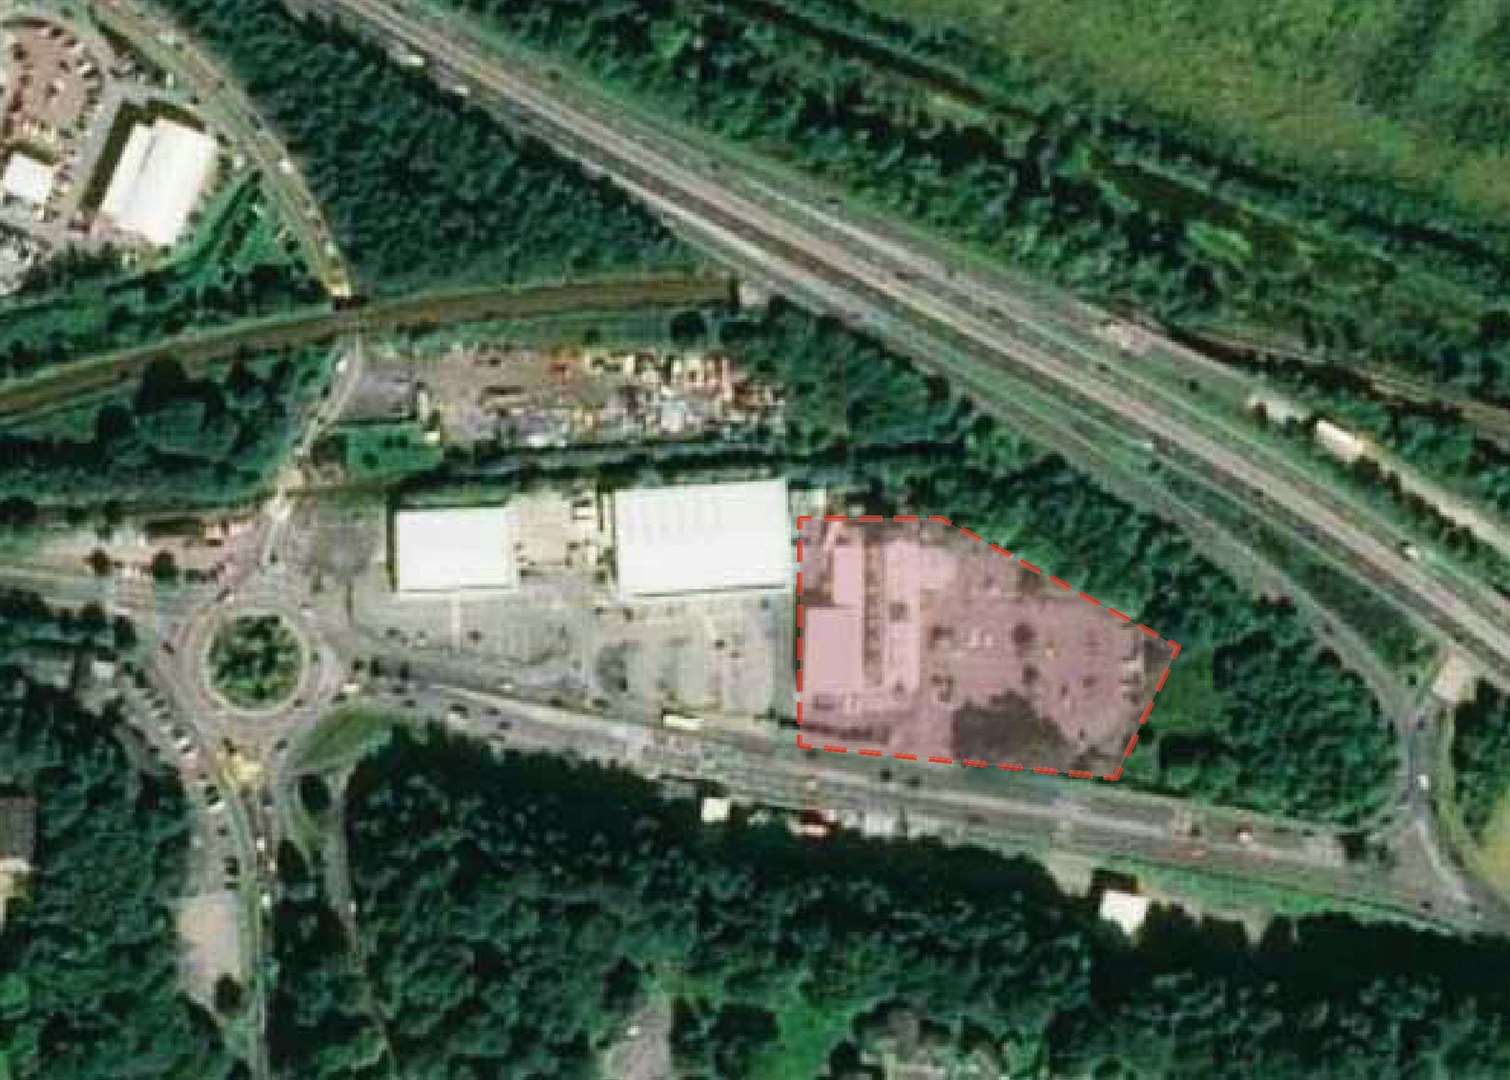 Aerial view of the site.